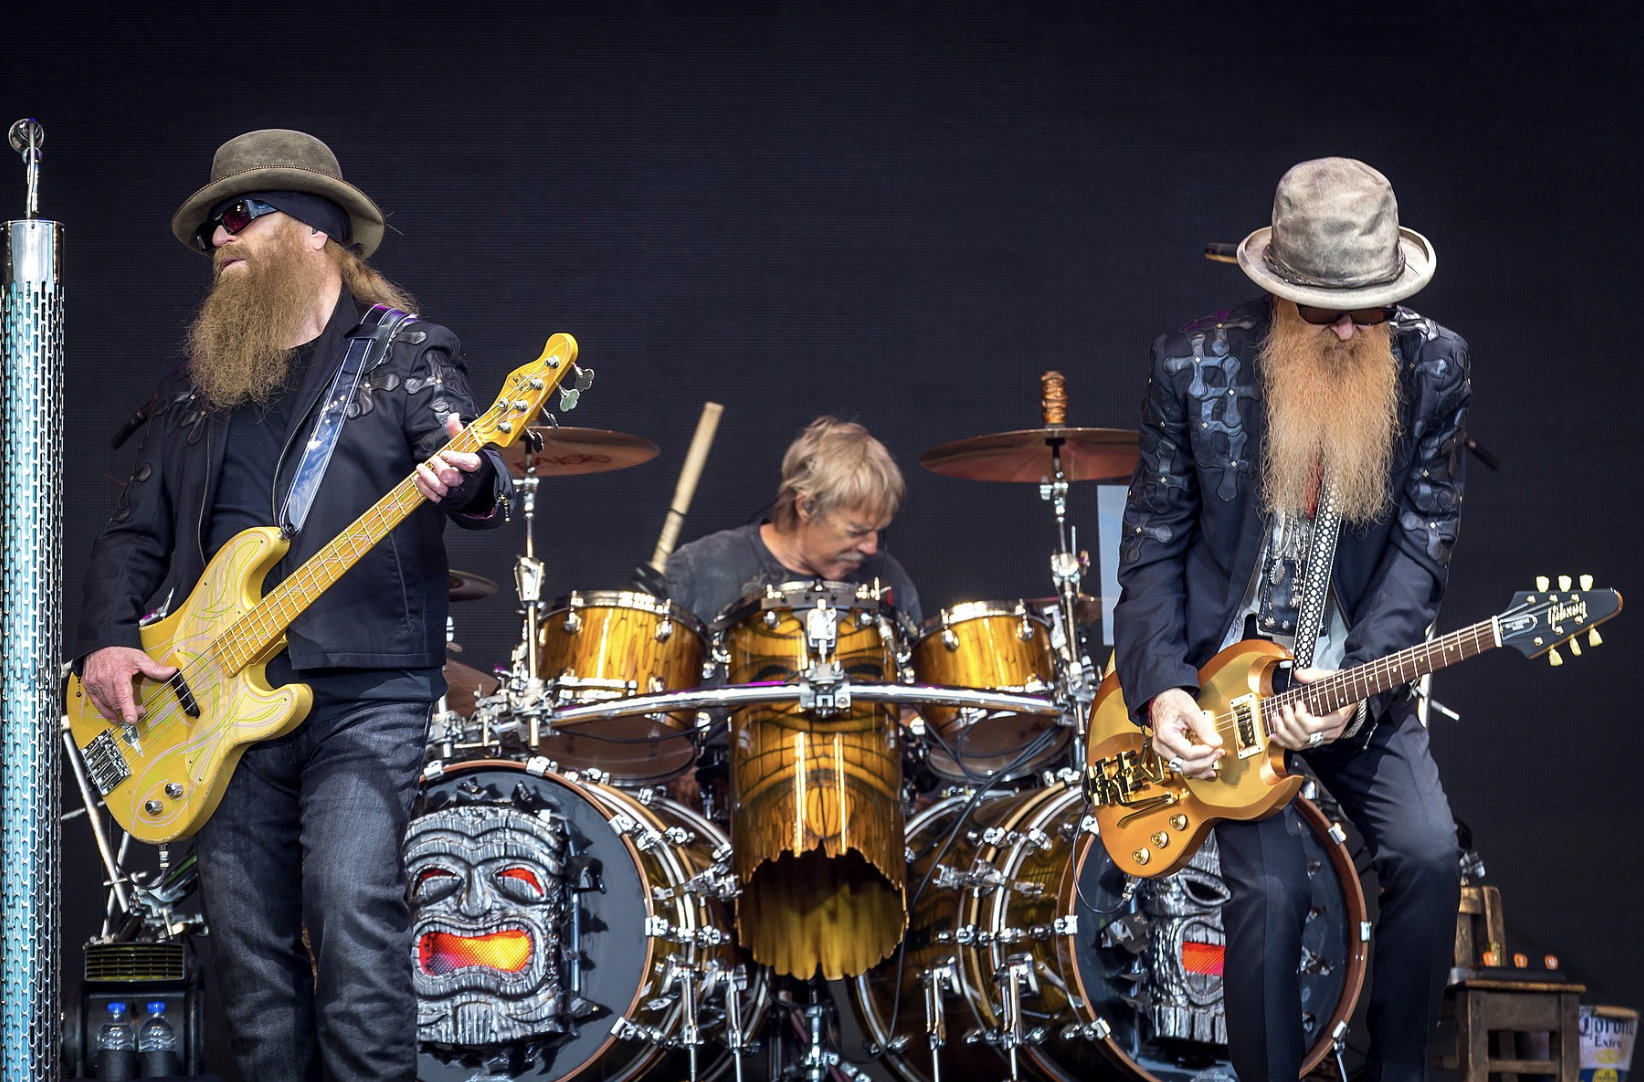 <p>Although ZZ Top is best known for those 1980s videos, they had been playing consistently since the early 1970s and won a dedicated fan base as a concert attraction. It all amounted to record sales of more than 50 million copies, and even though bassist Dusty Hill passed away in 2021, the band is still touring and isn’t going away anytime soon.</p>